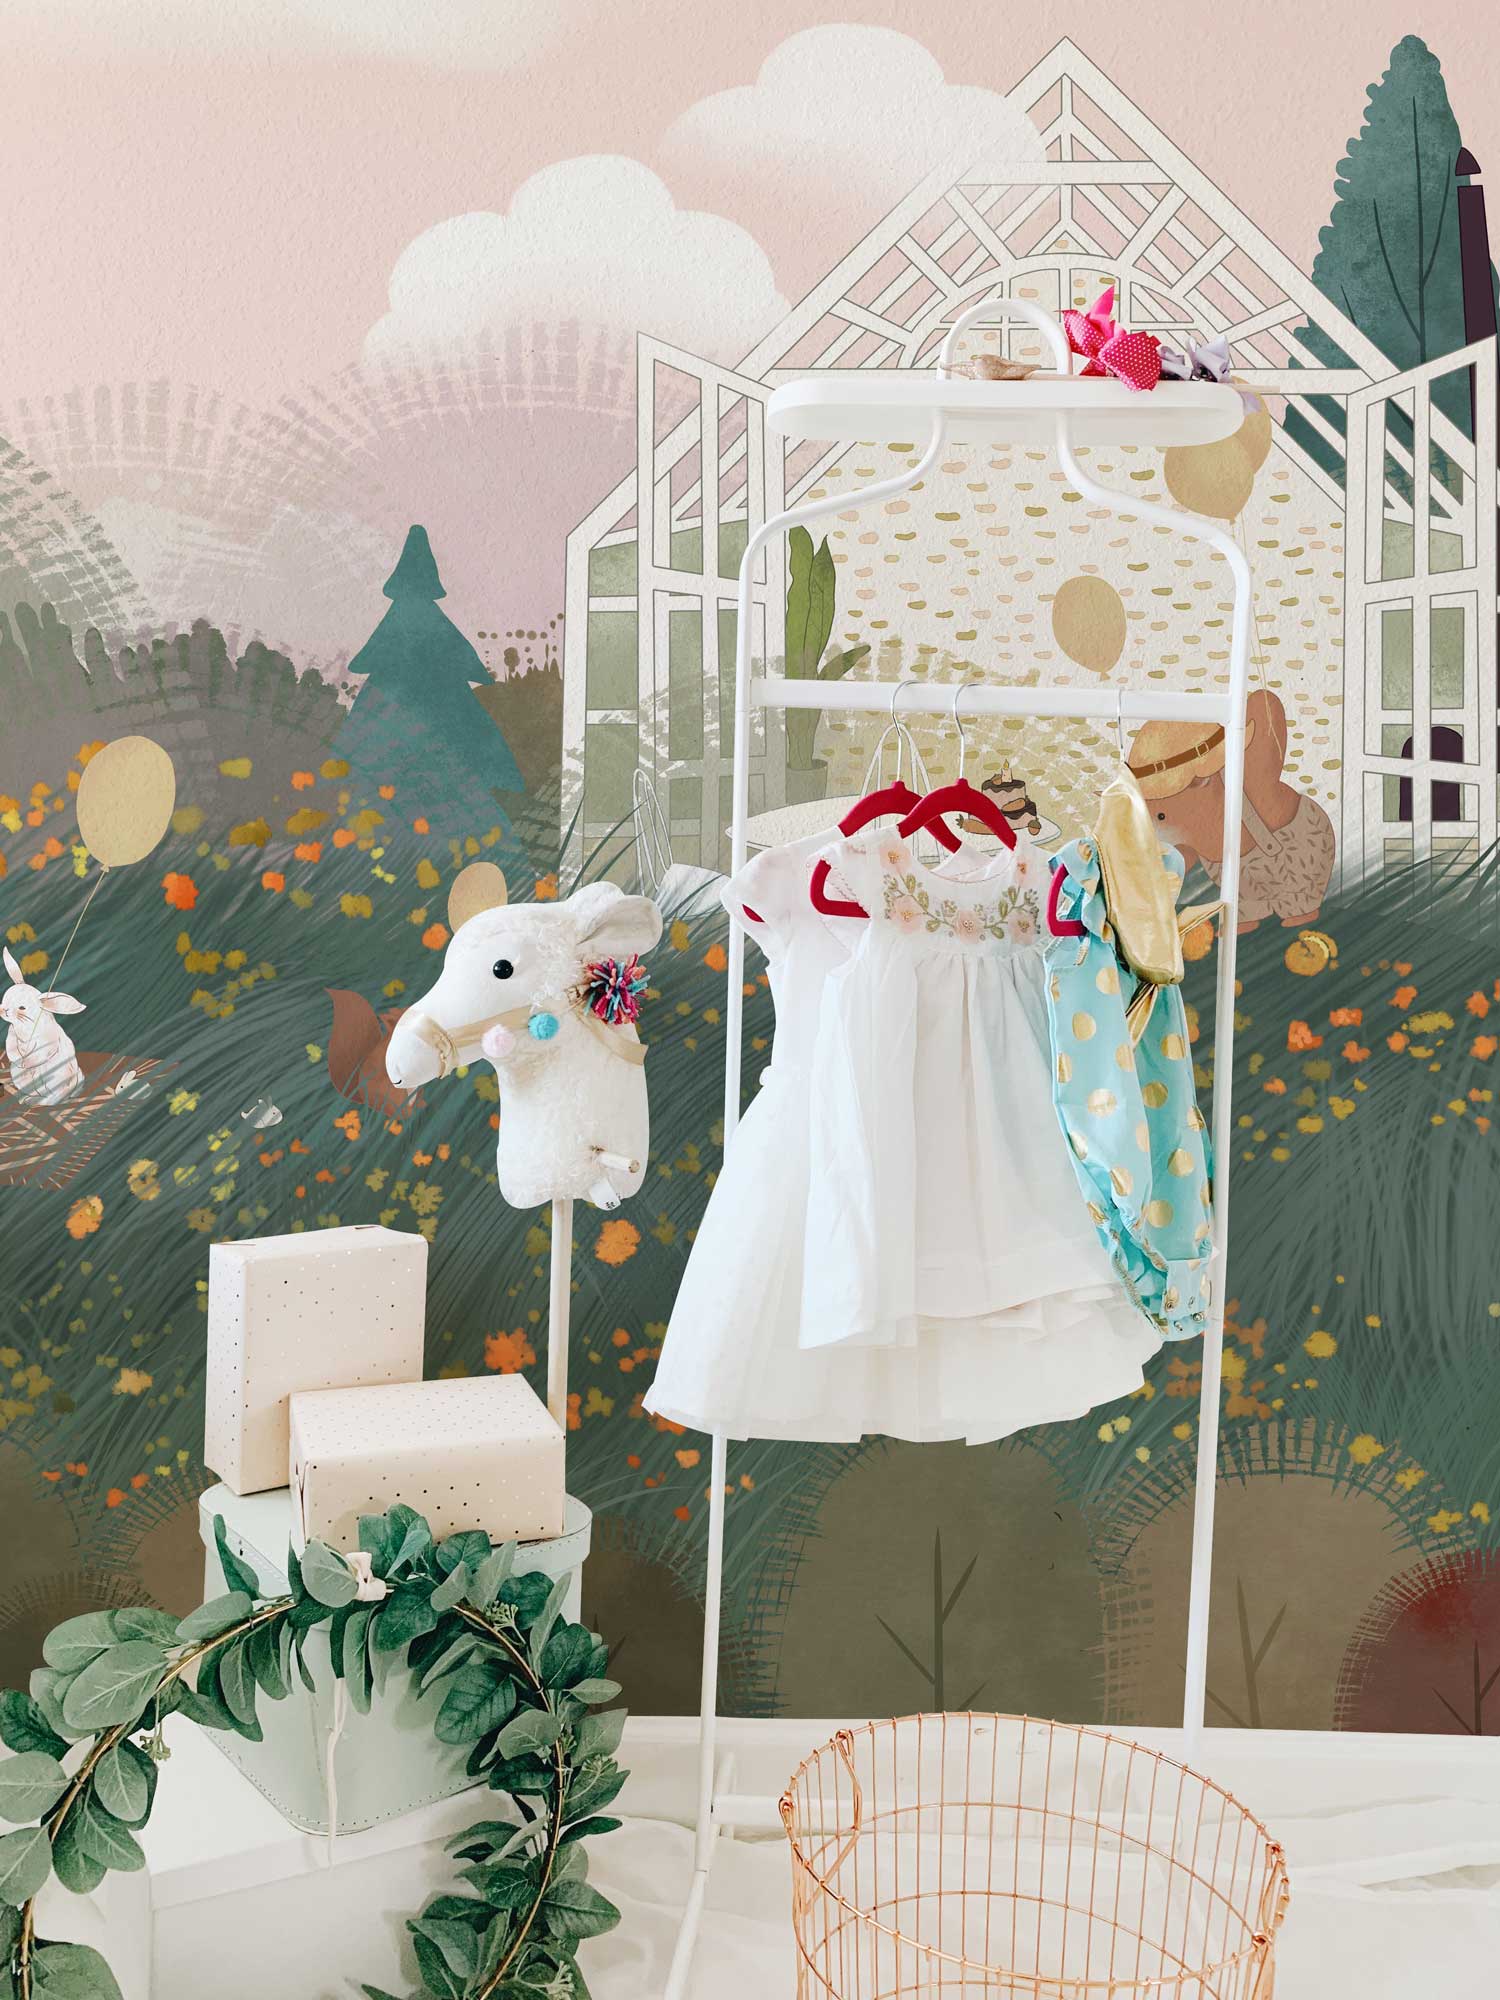 Wall mural featuring an animal picnic for use in decorating nurseries.